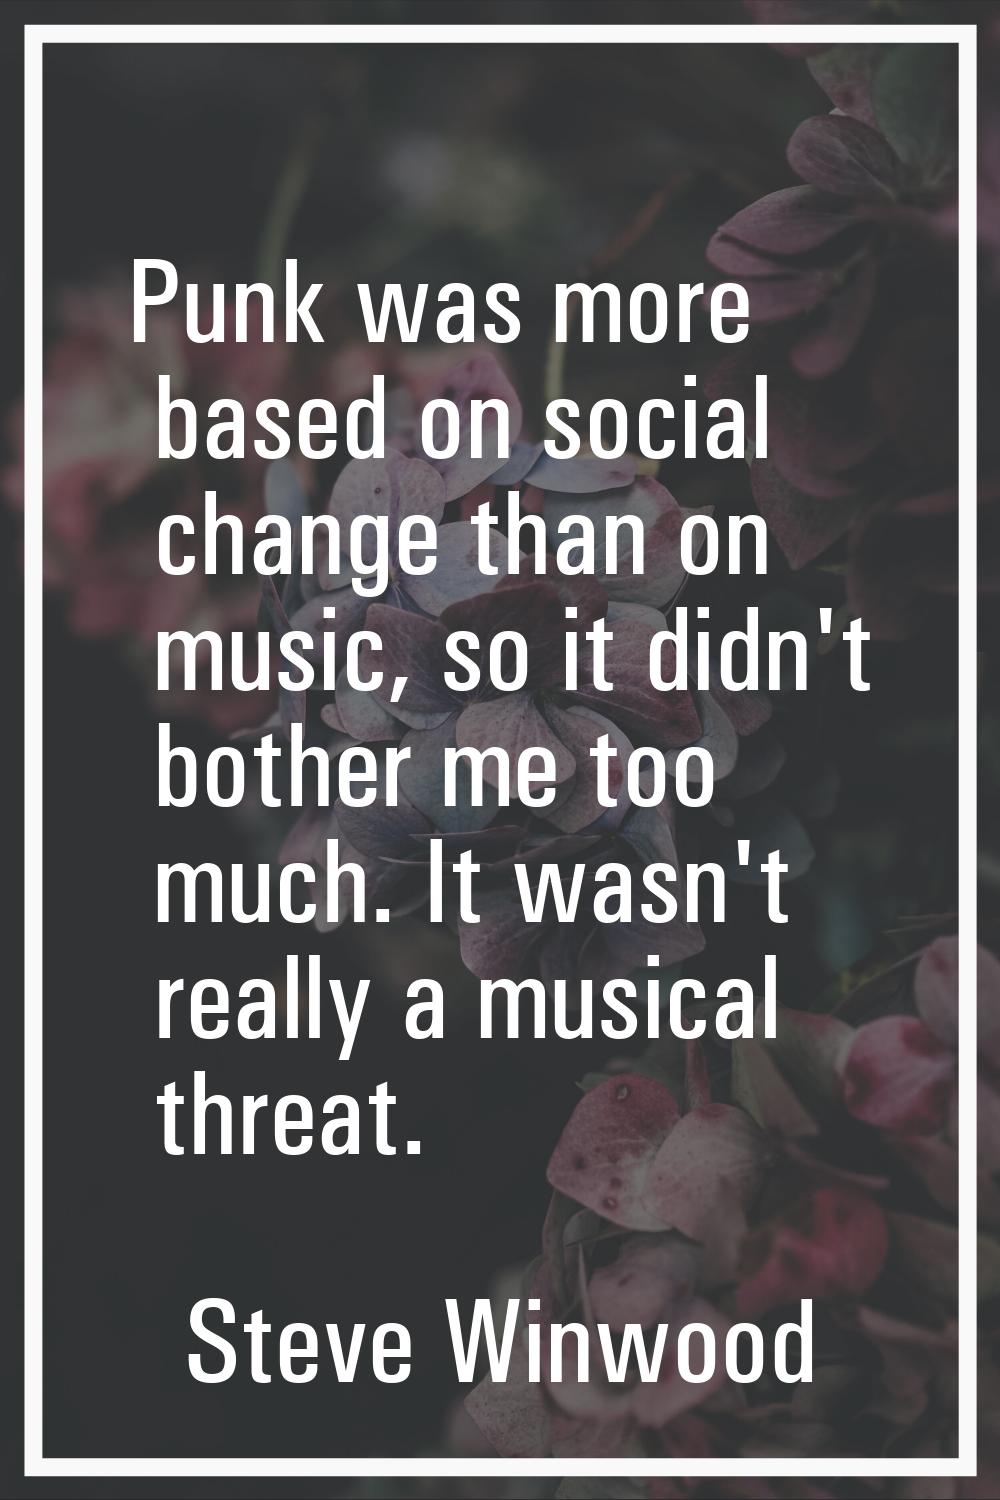 Punk was more based on social change than on music, so it didn't bother me too much. It wasn't real